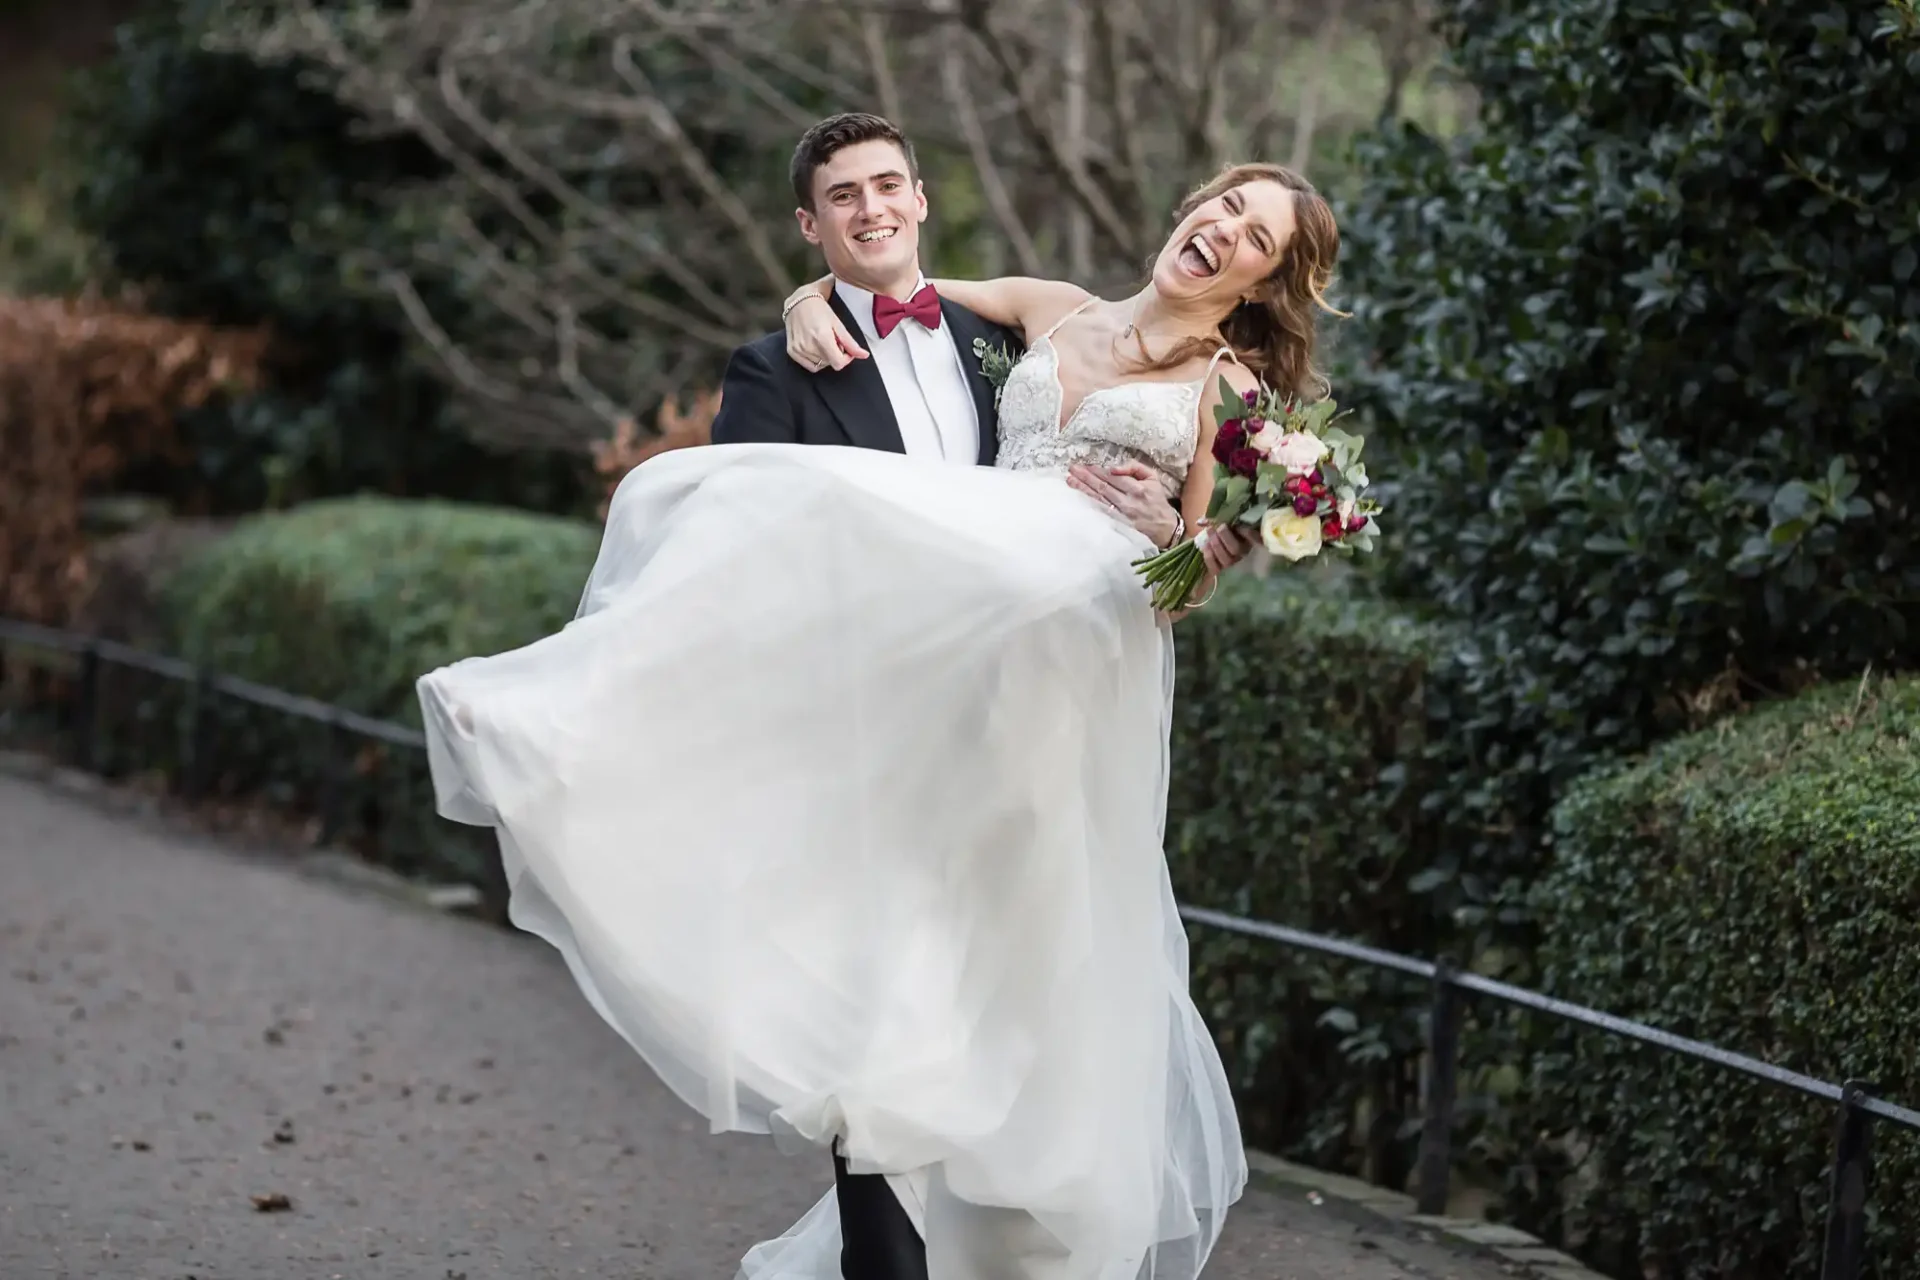 A groom in a black suit and red bow tie carries a smiling bride in a white wedding dress as they walk outdoors, surrounded by greenery.